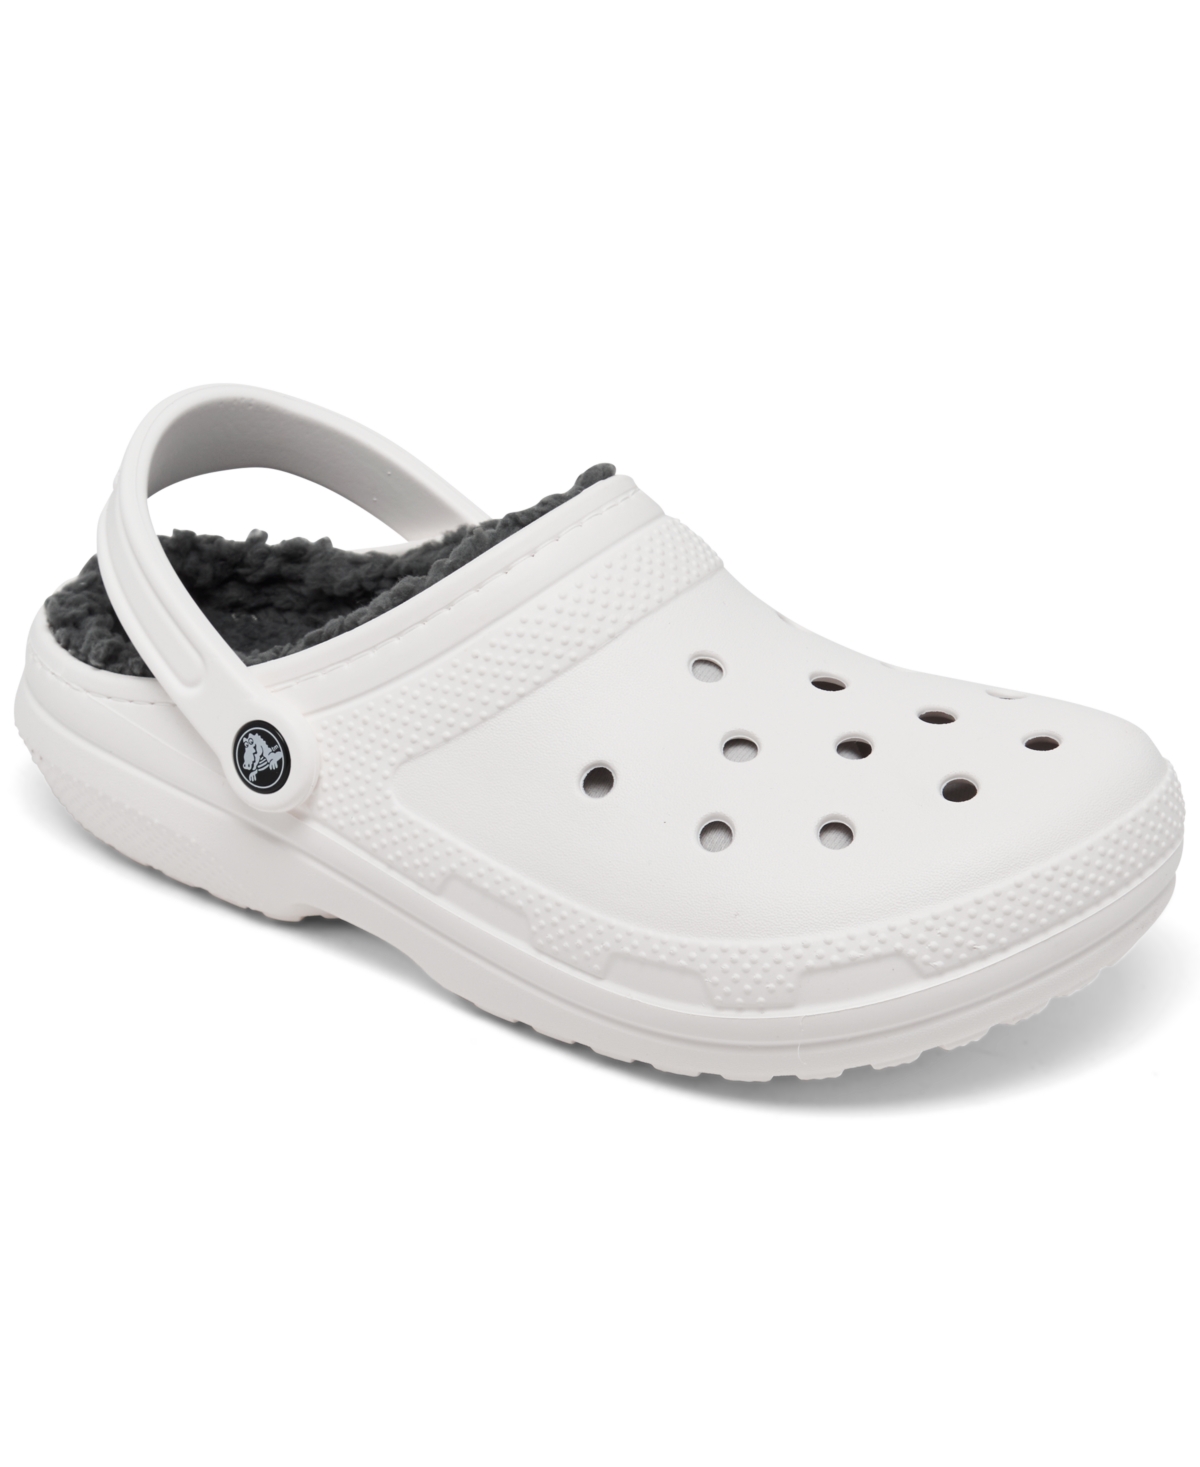 Men's and Women's Classic Lined Clogs from Finish Line - White, Gray